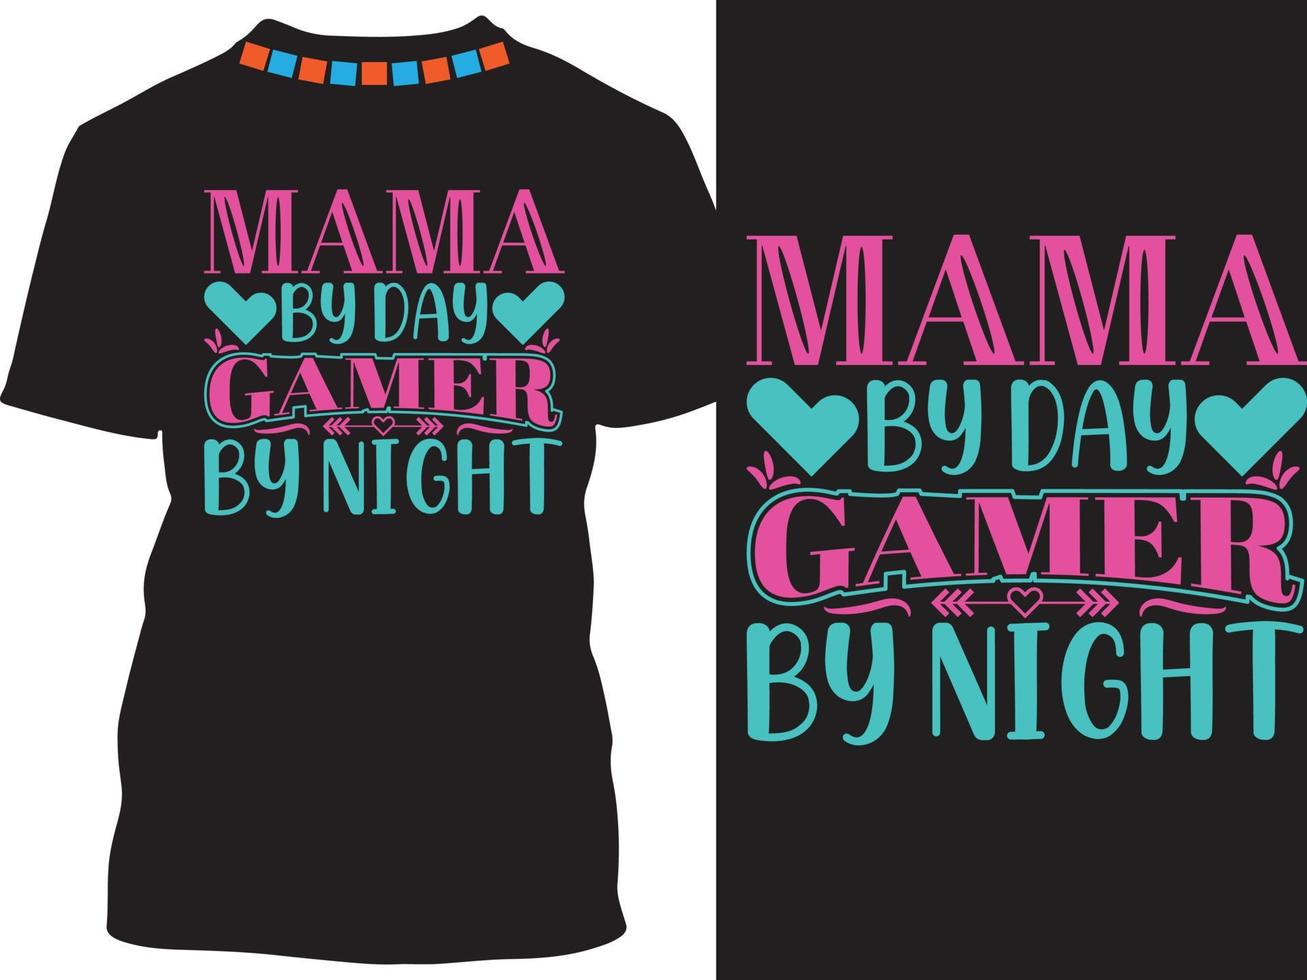 Mama By Day Gamer By Night t shirt design vector